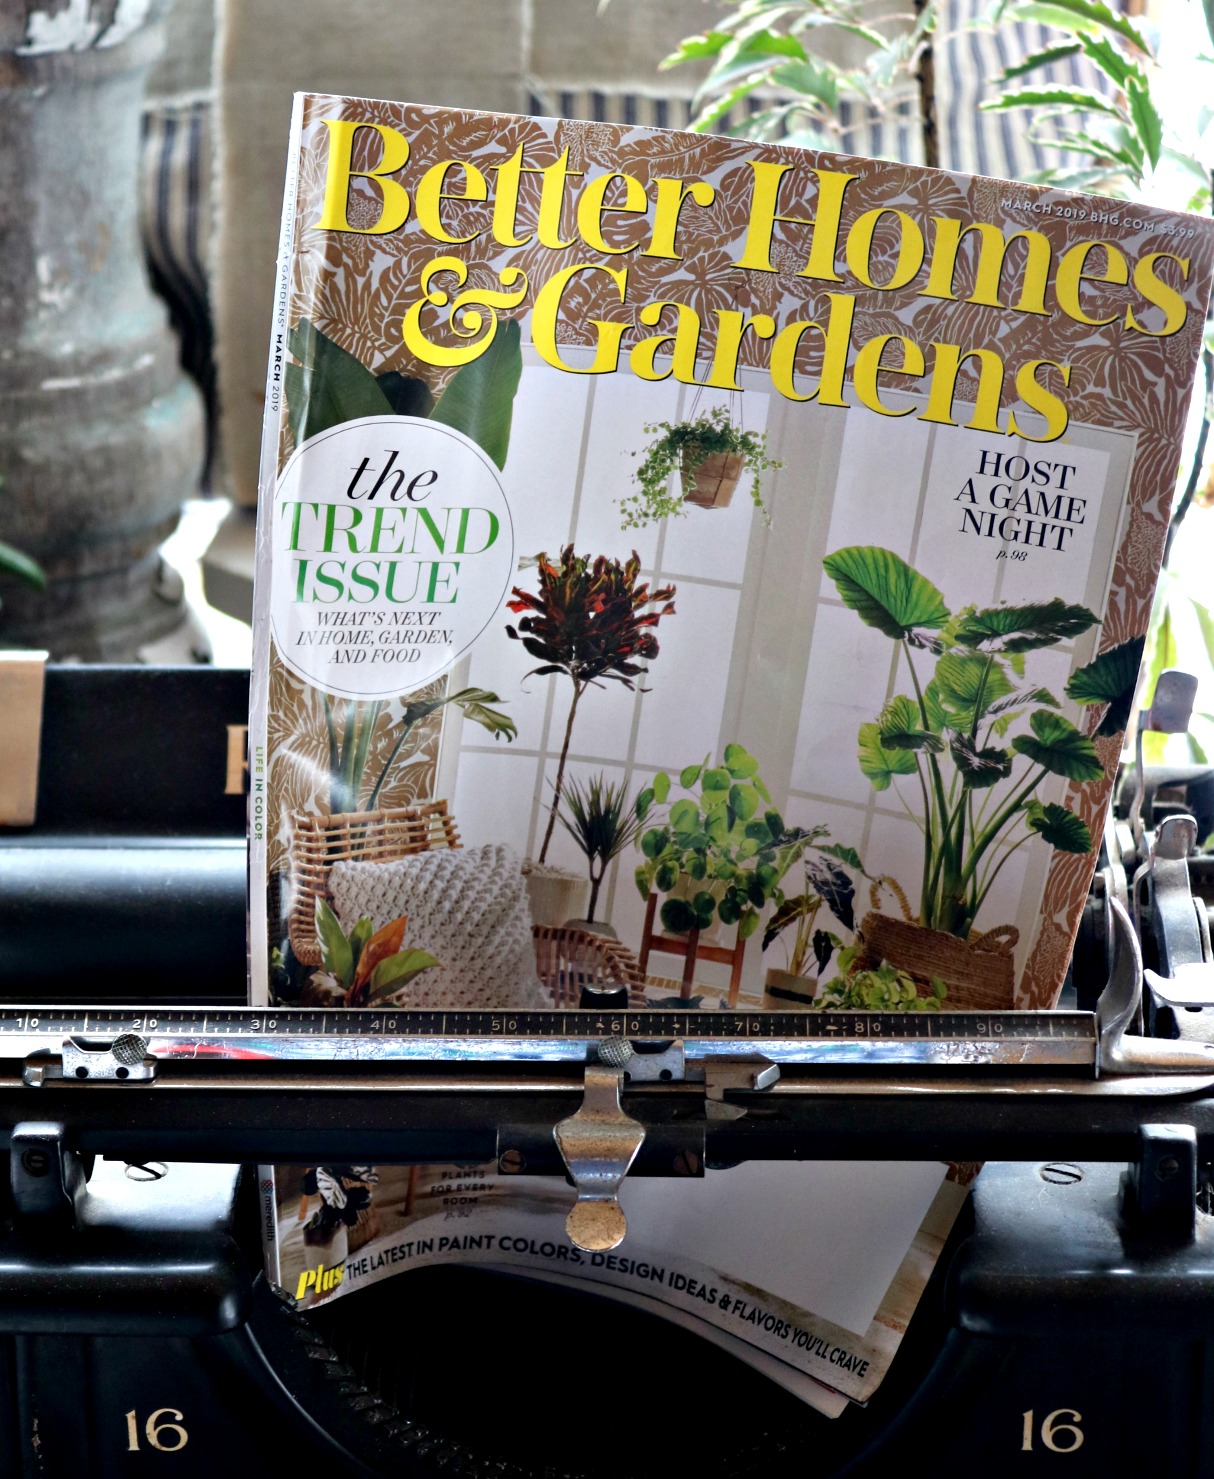 To Trend or Not To Trend? What's trending and how you can vote on the trends at Better Homes & Gardens magazines for their March Madness